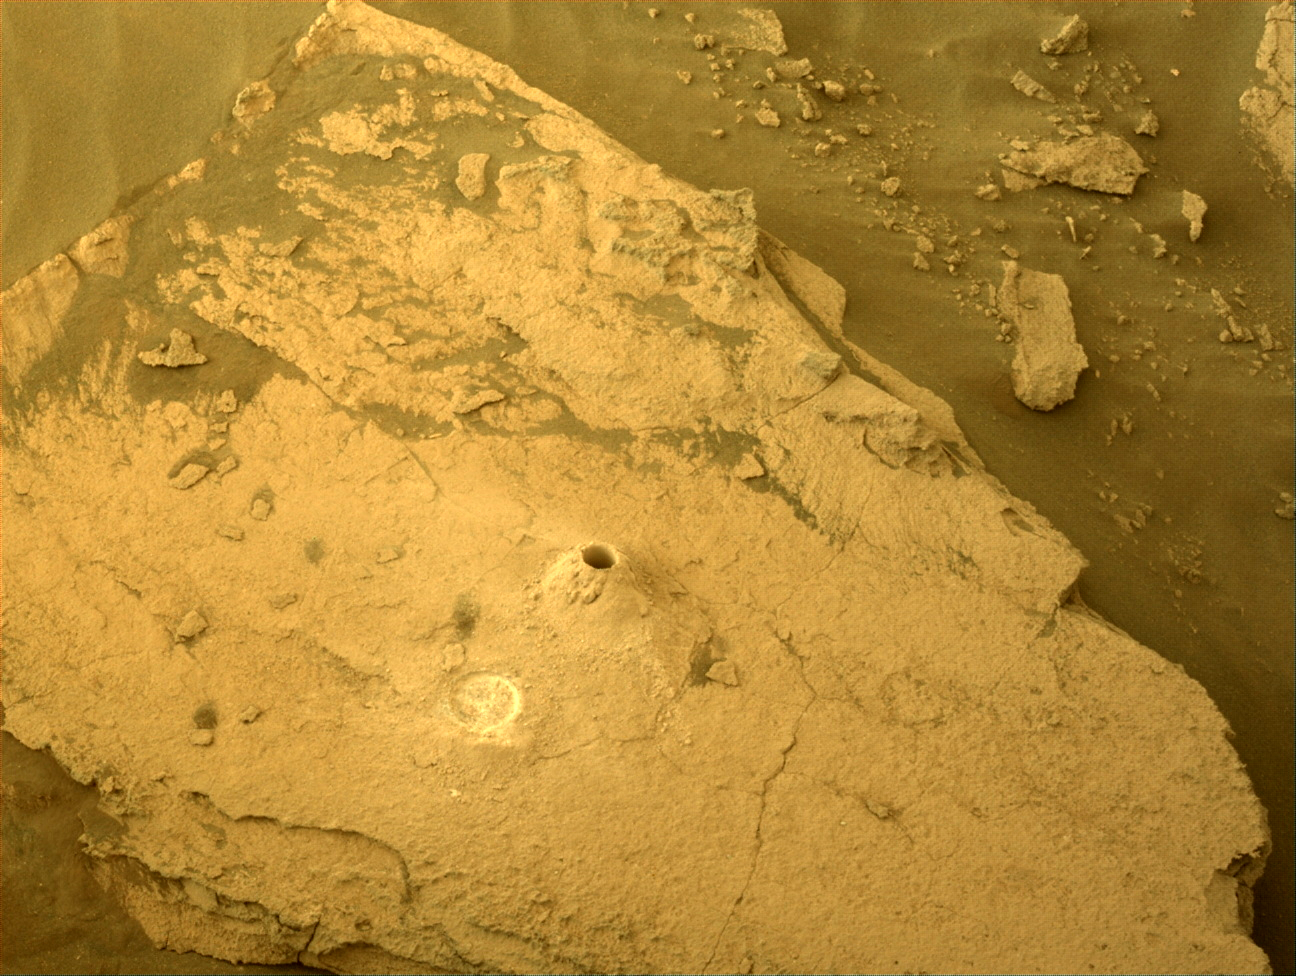 Image taken was taken by the Mars Perseverance rover after collecting the rock sample 10 at Swift Run.